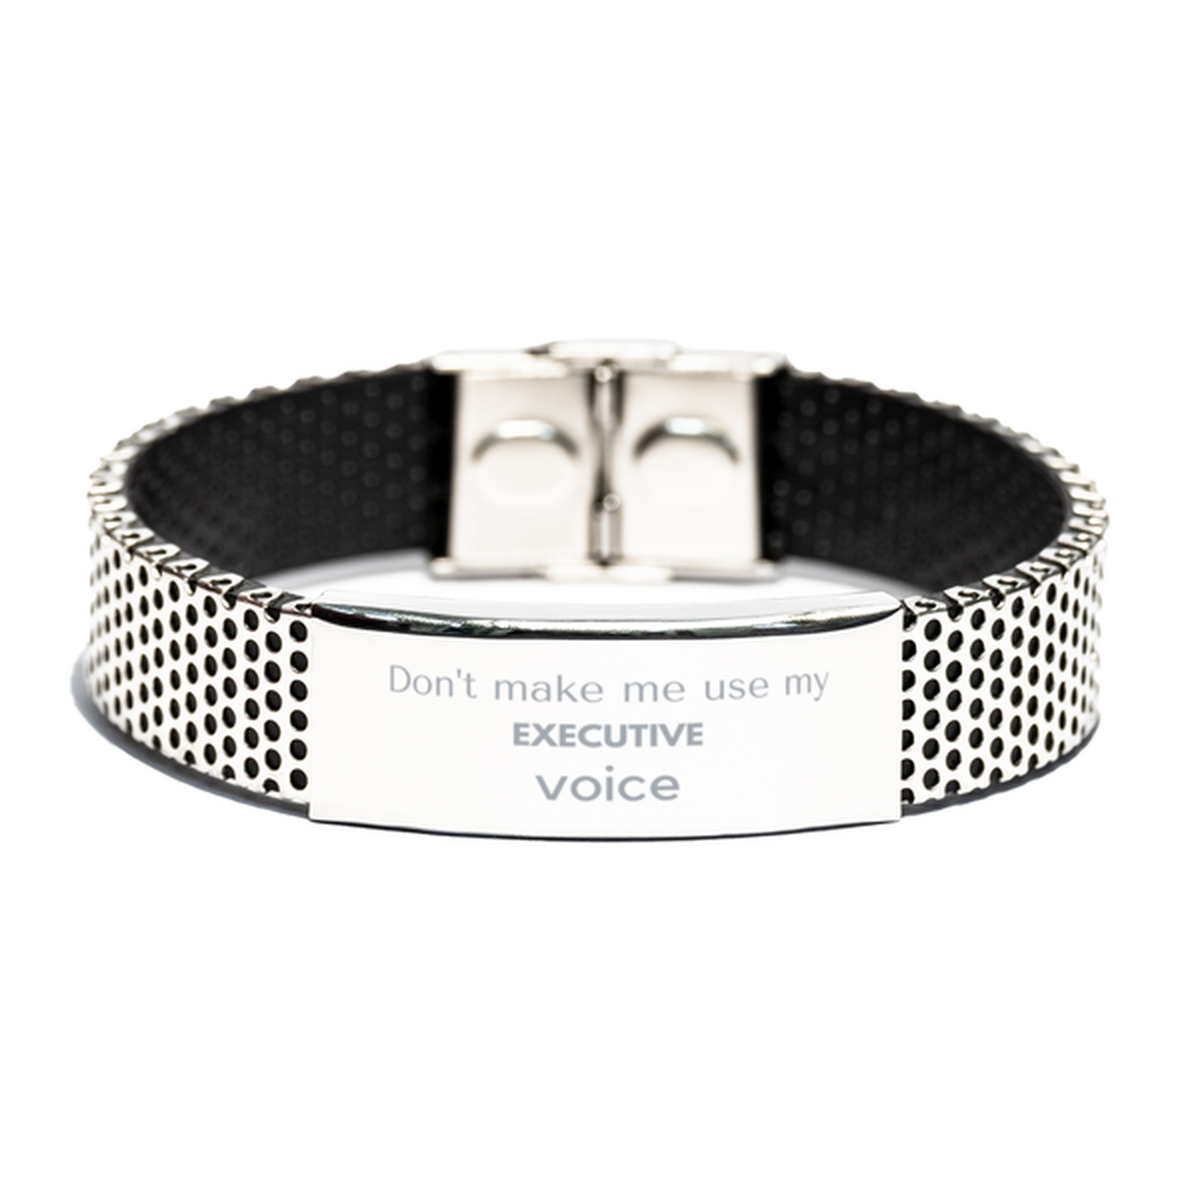 Don't make me use my Executive voice, Sarcasm Executive Gifts, Christmas Executive Stainless Steel Bracelet Birthday Unique Gifts For Executive Coworkers, Men, Women, Colleague, Friends